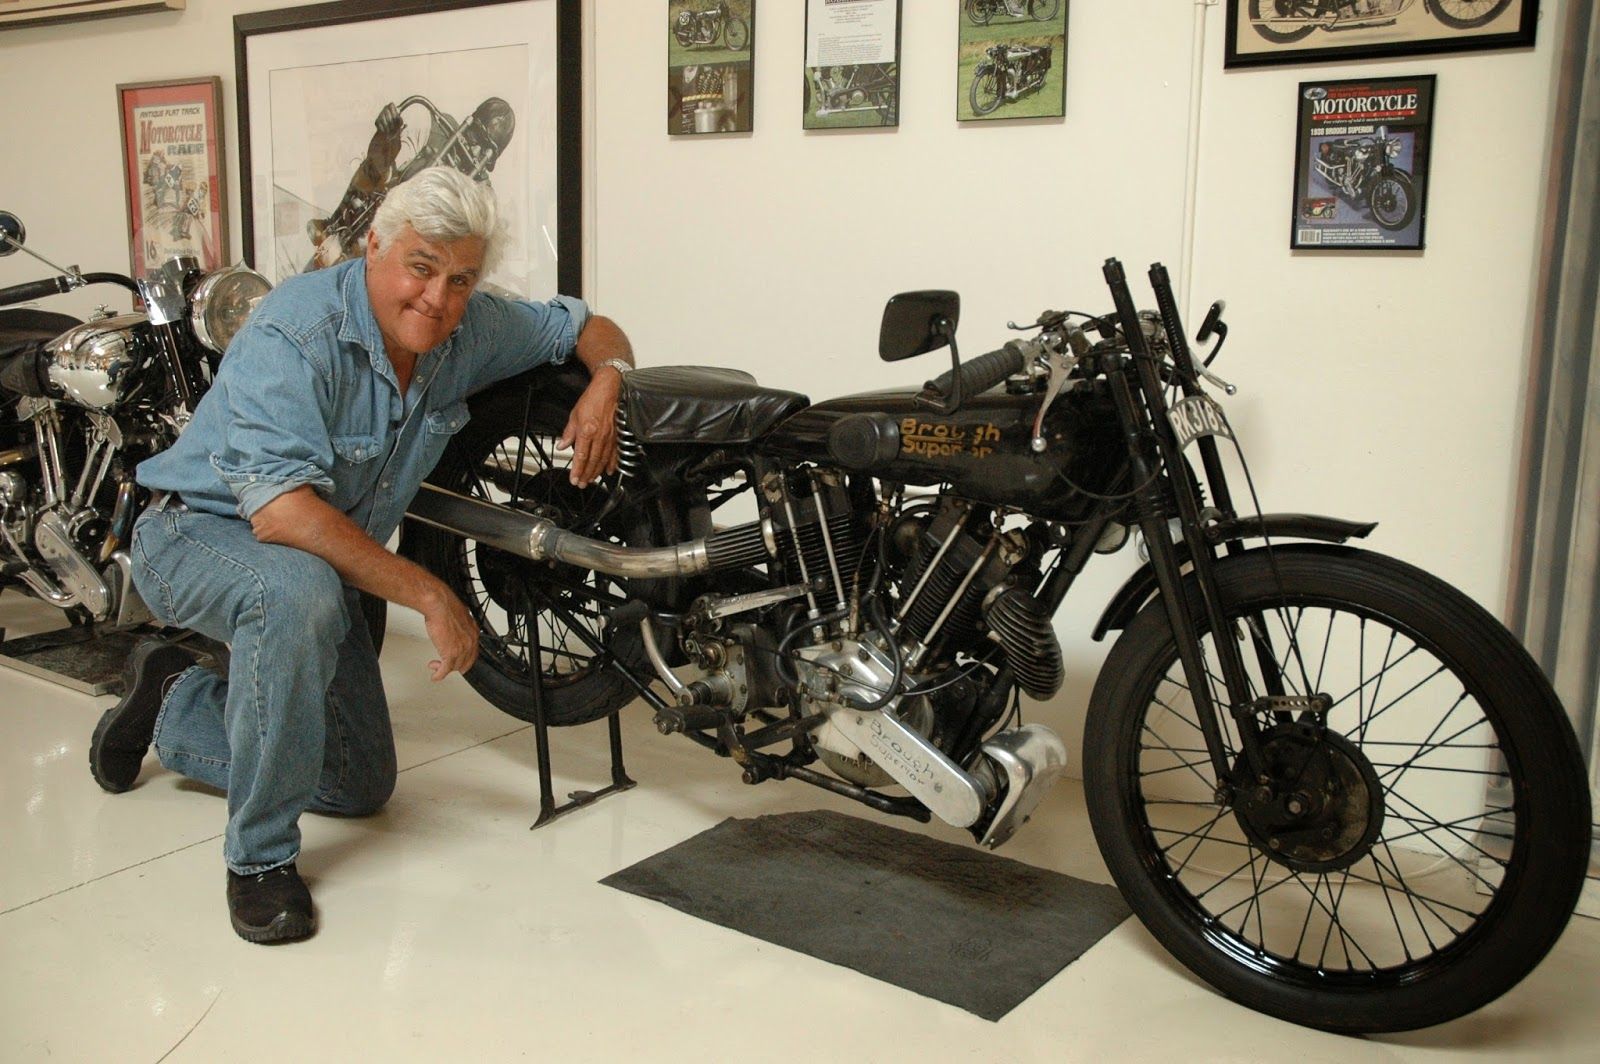 Jay Leno with a classic bike